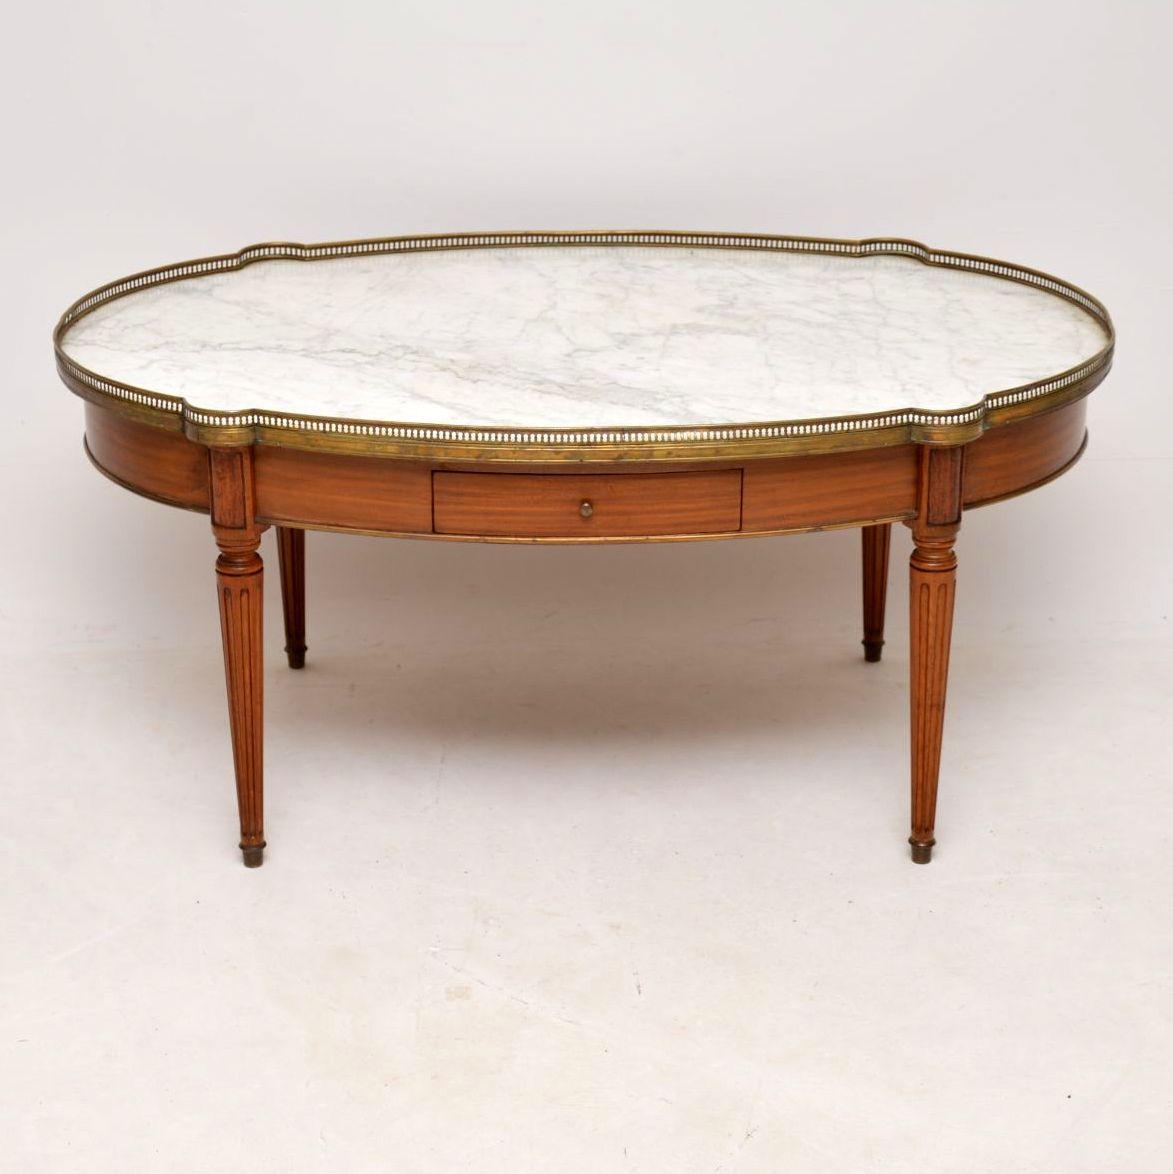 Large well shaped antique French walnut coffee table with a marble top surrounded by a pierced gilt bronze gallery. It’s in good original condition and I would date it to around the 1910s-1920s period. This table has some lovely features. There are